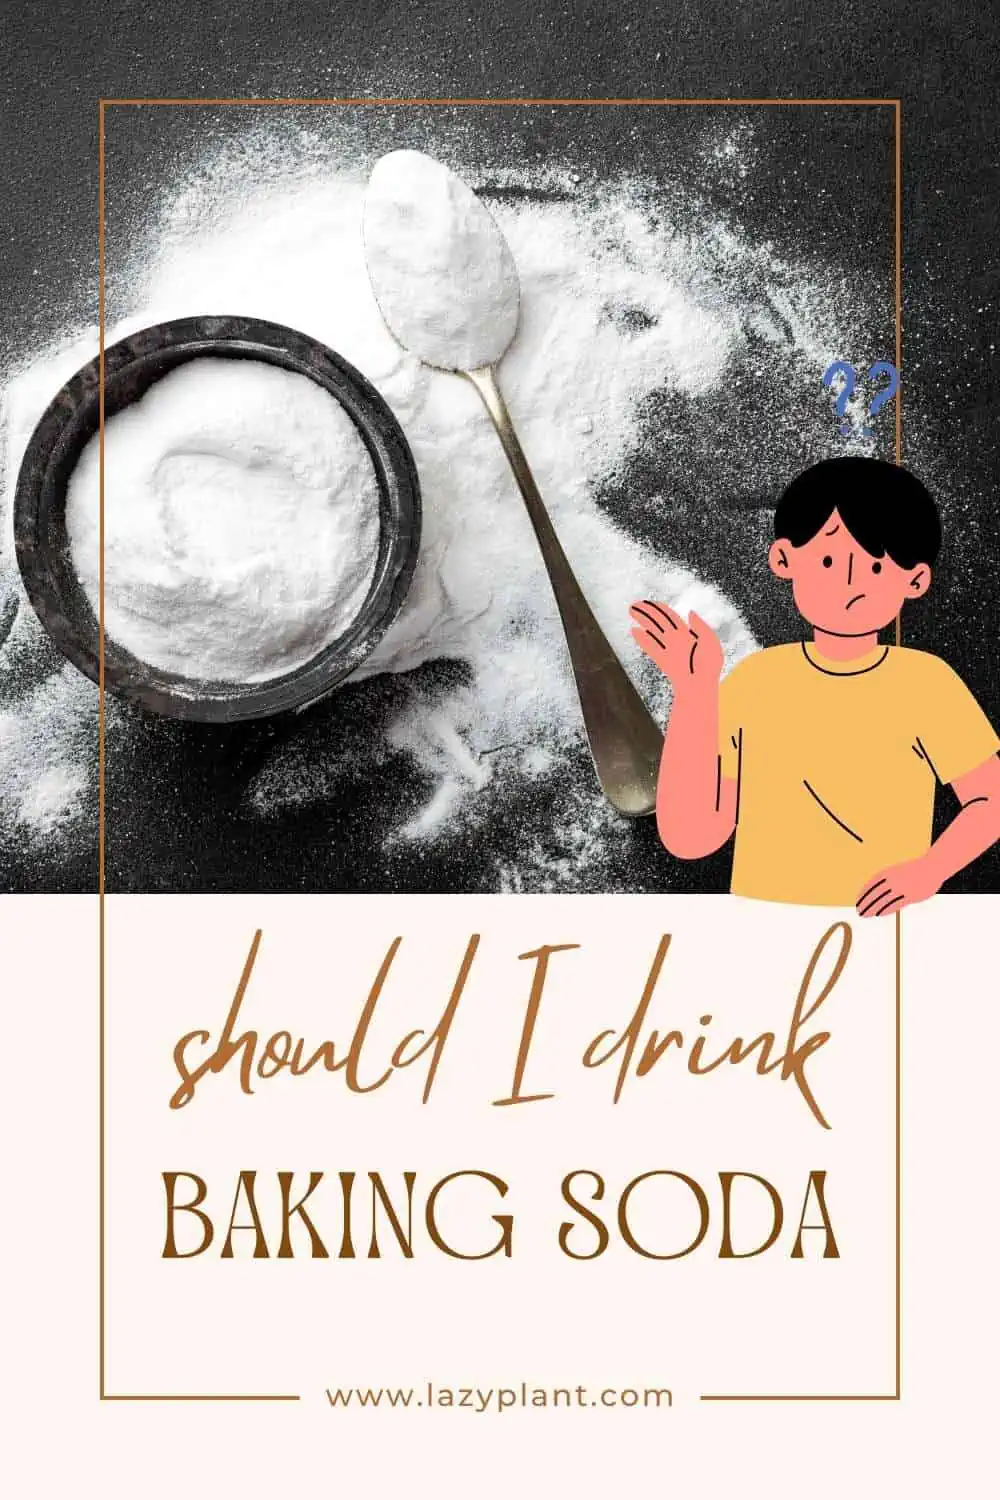 How much baking soda should I drink for good health?